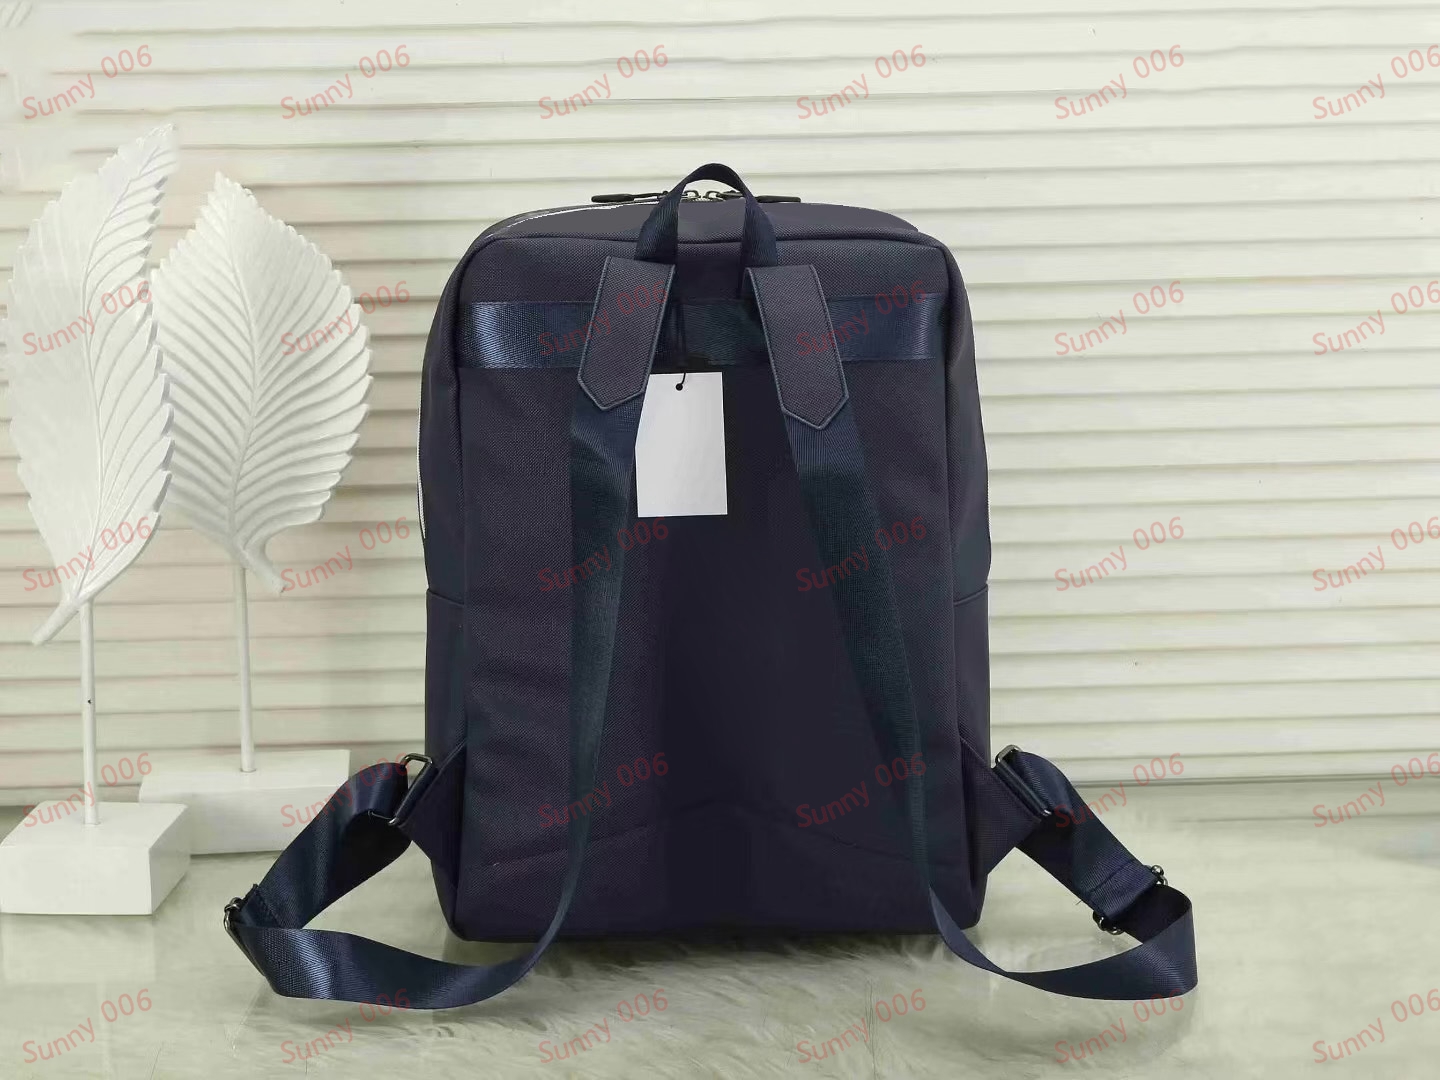 Dual Zip Fashion Backpack High Quality Luxury Bag Outdoor Camping Backpacks Handbags Designer Solid Tourism Luggage Rucksack